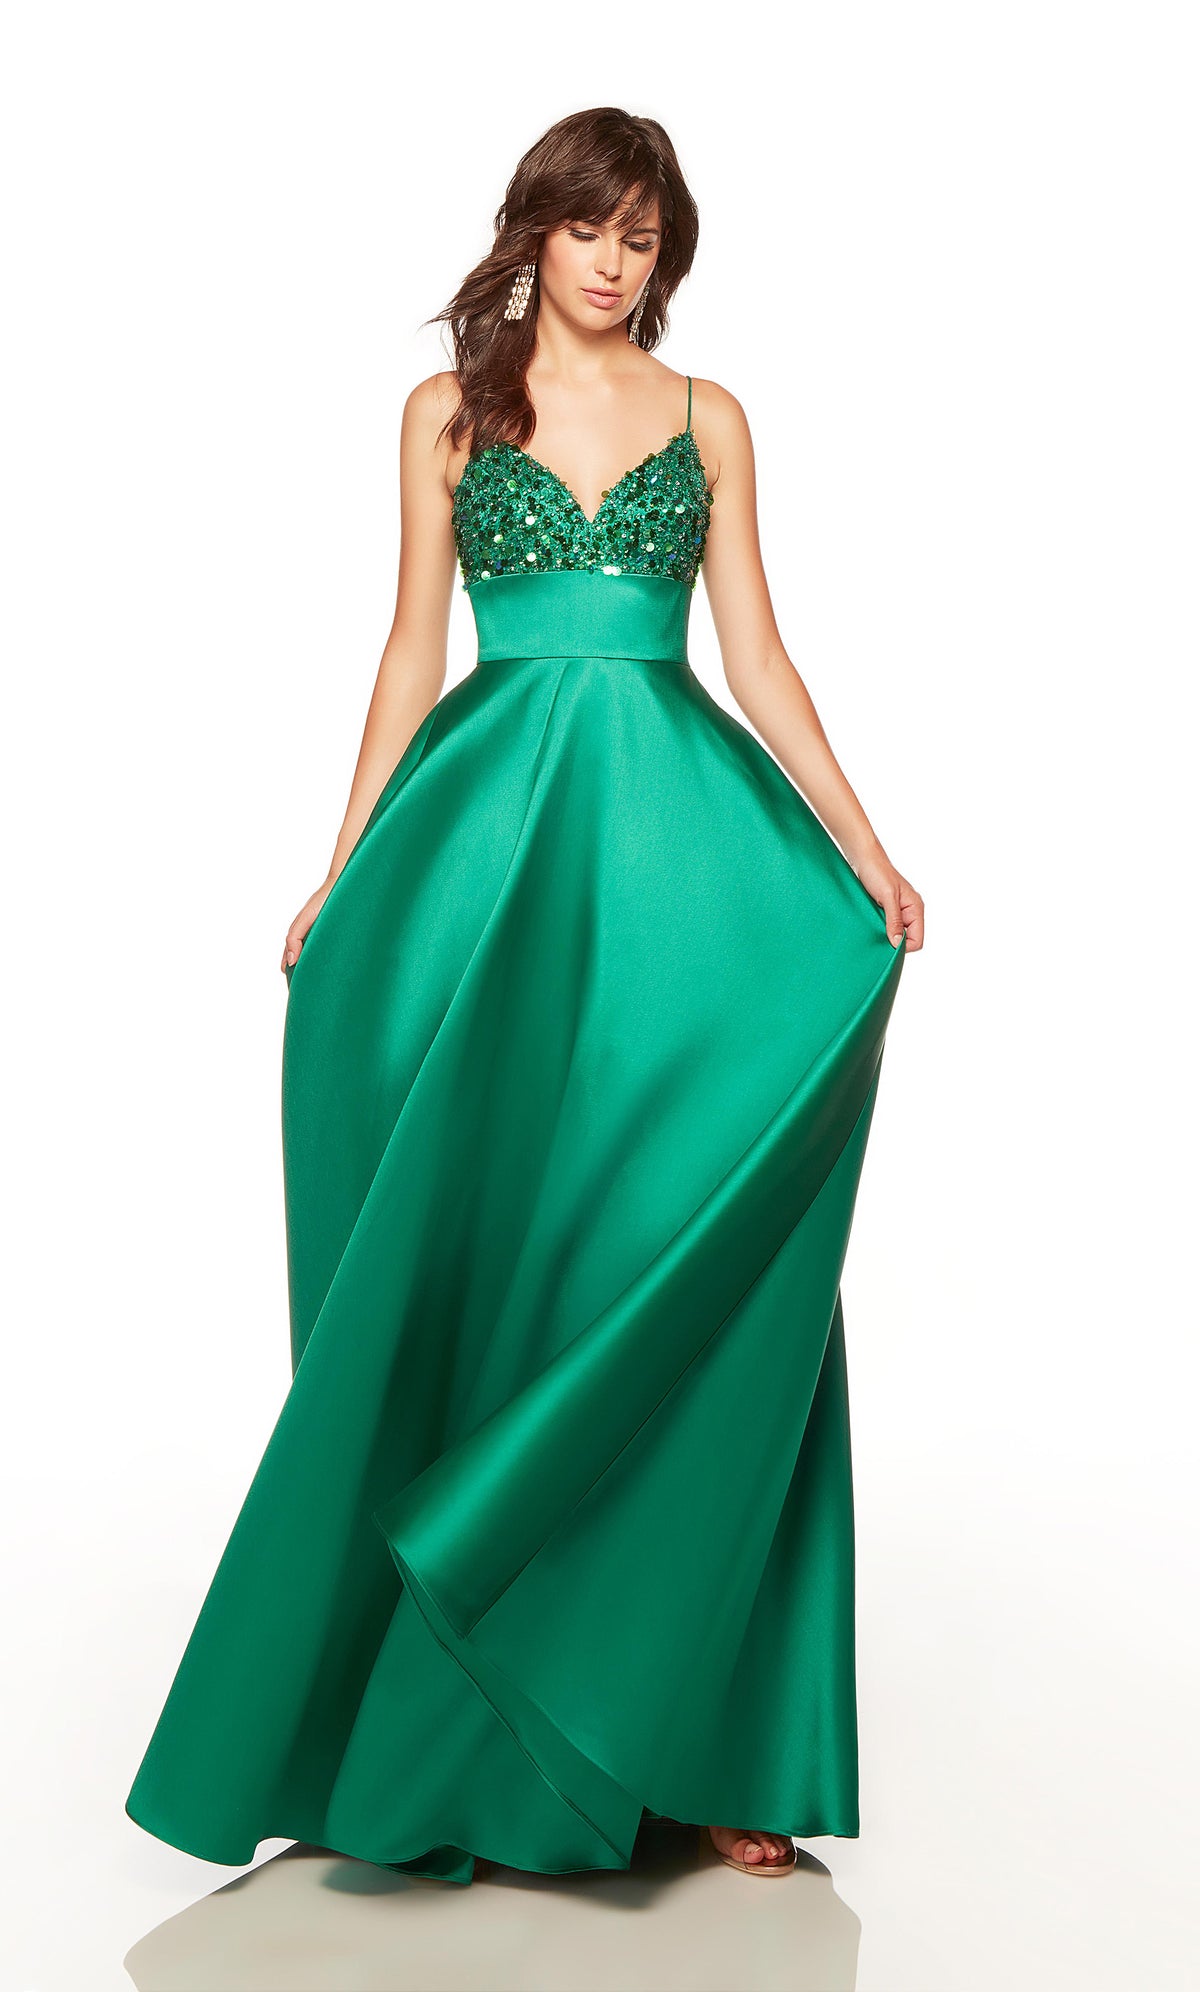 Green gown with a sweetheart neckline, beaded bodice, and pockets.